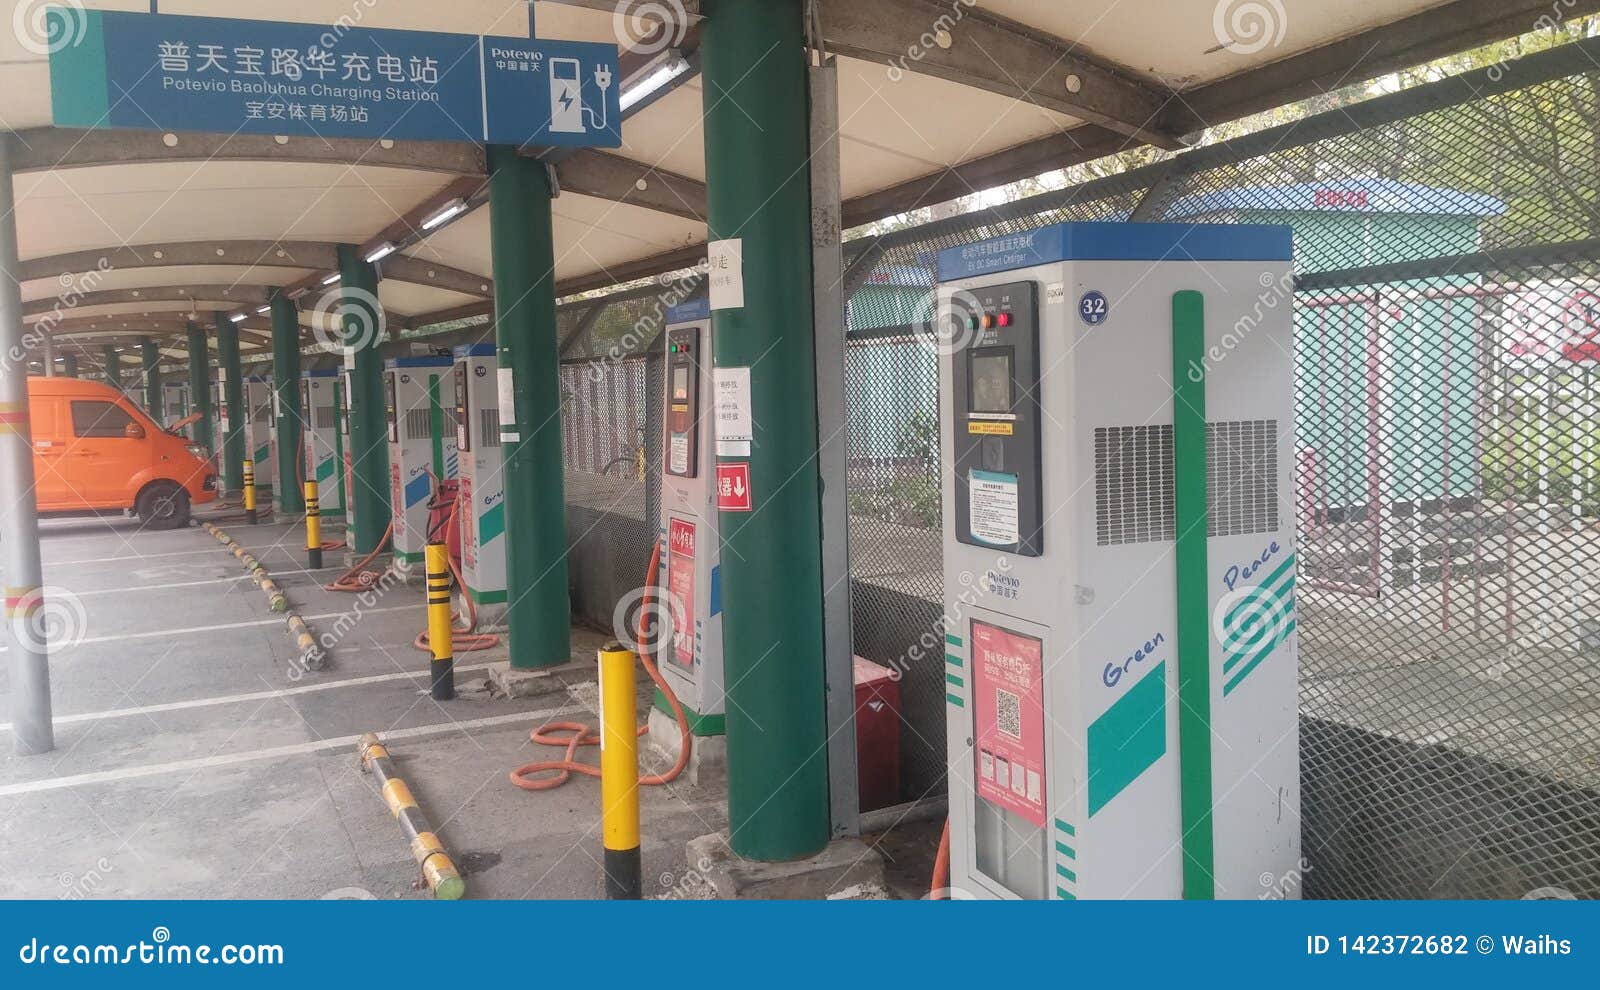 Shenzhen, China Electric Vehicle Charging Station and Charging